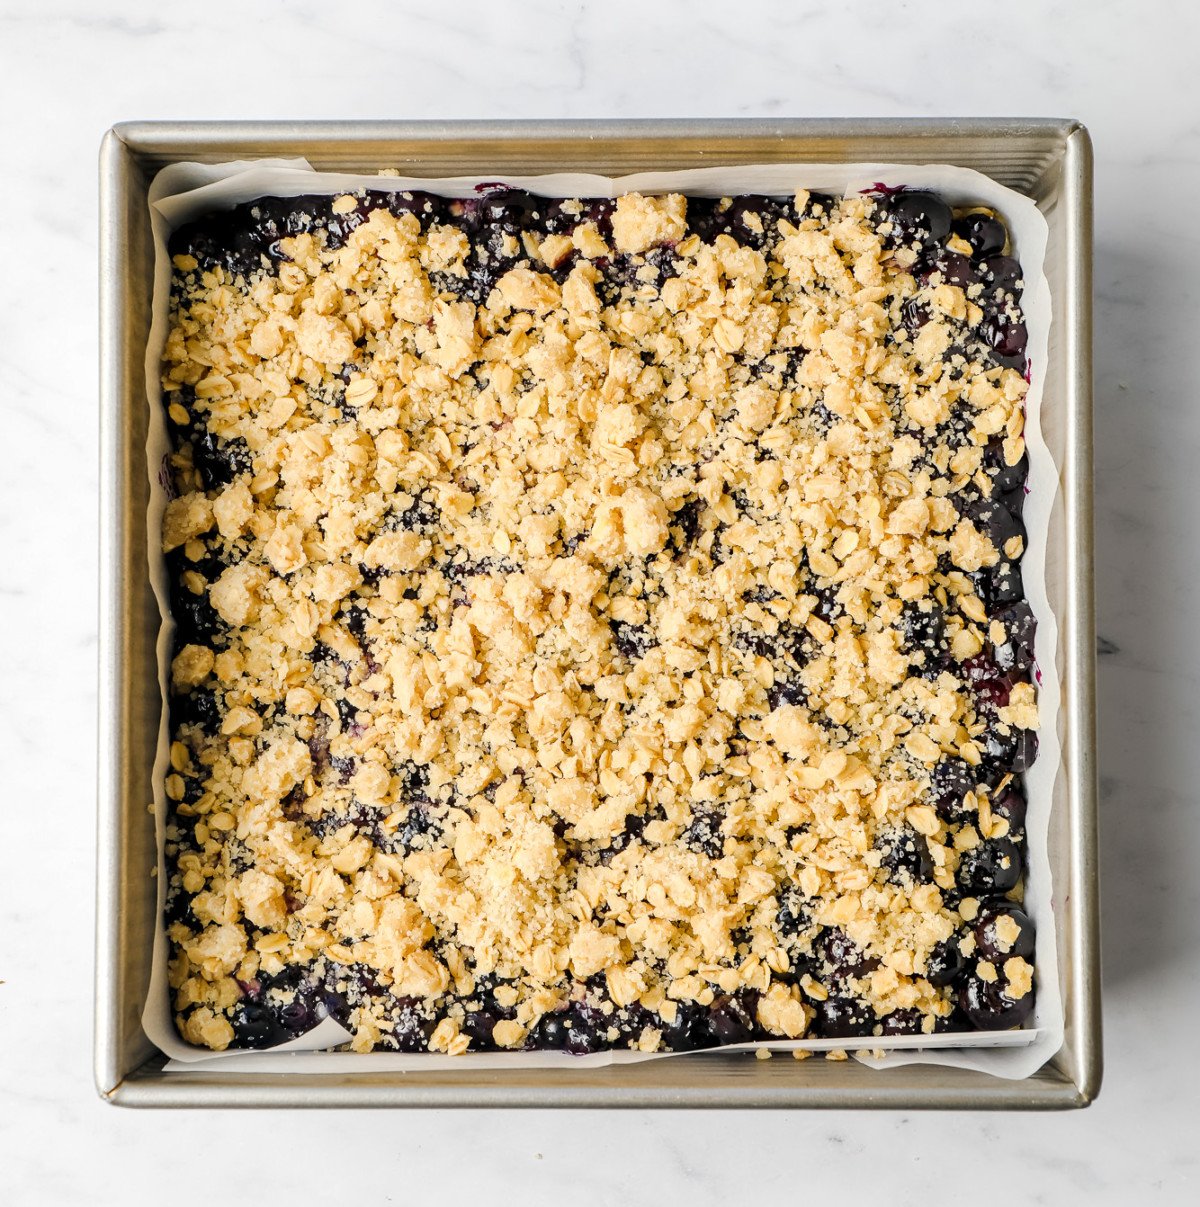 uncooked crumb mixture with berries underneath in a square pan